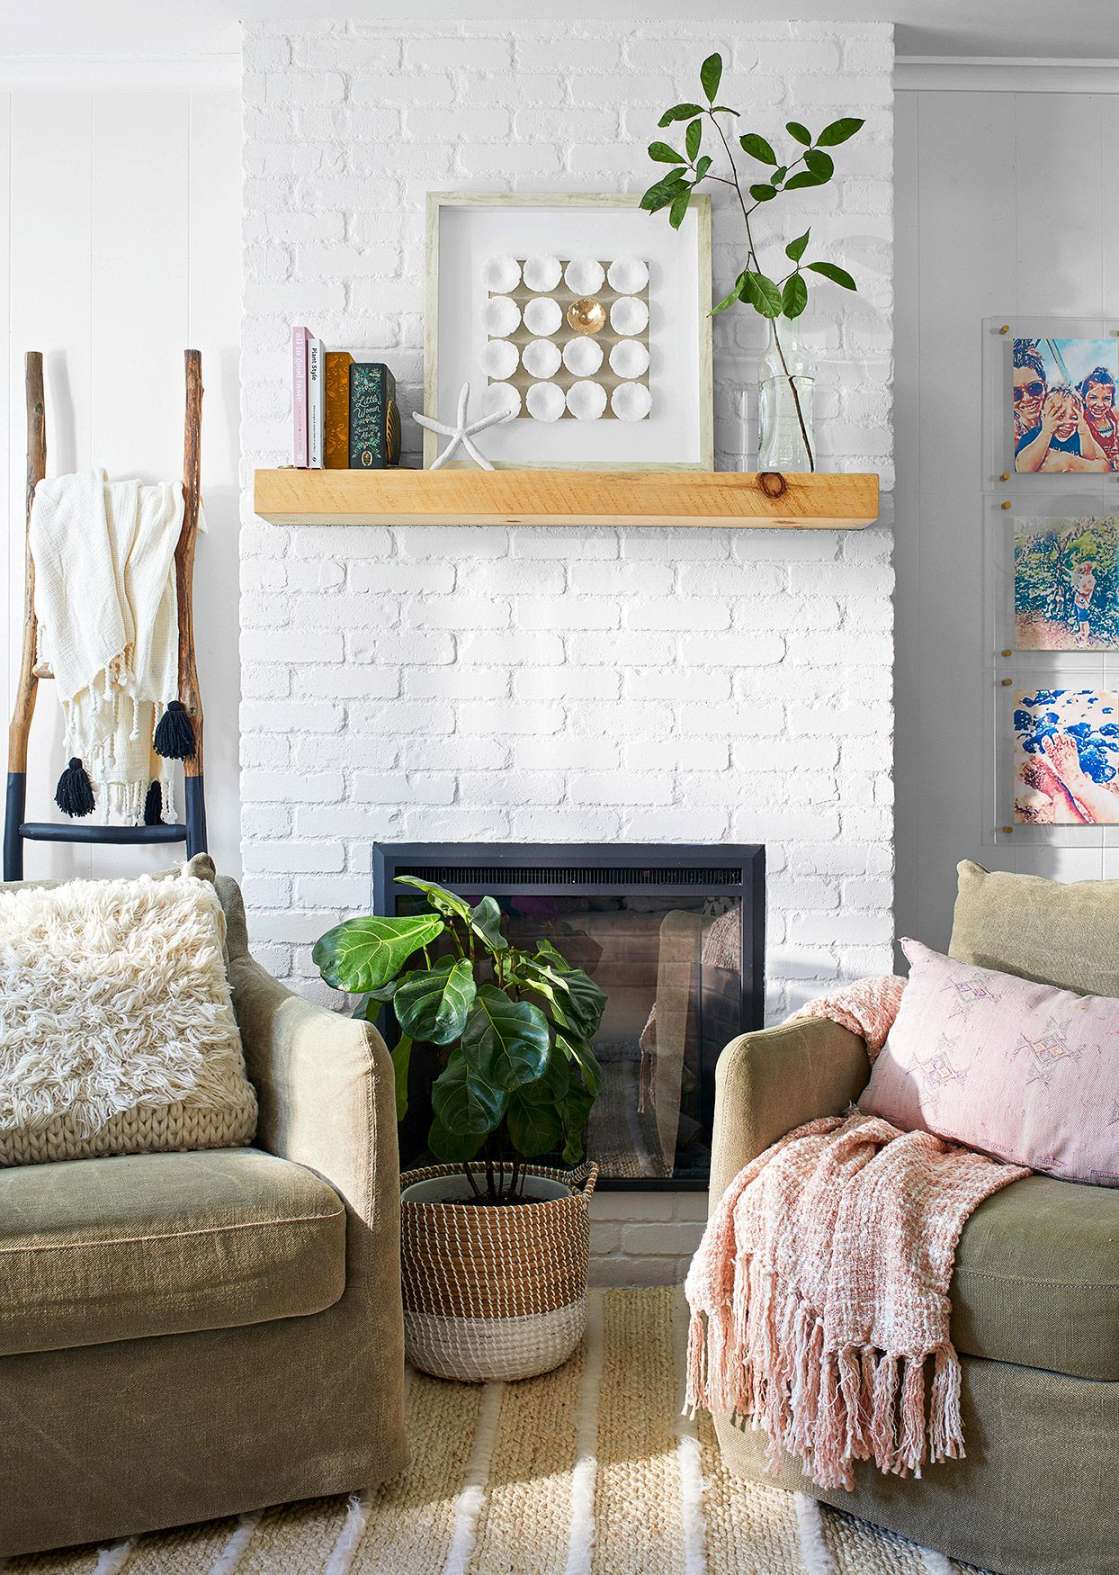 Ideas for Built-Ins Around a Fireplace that Add Character and